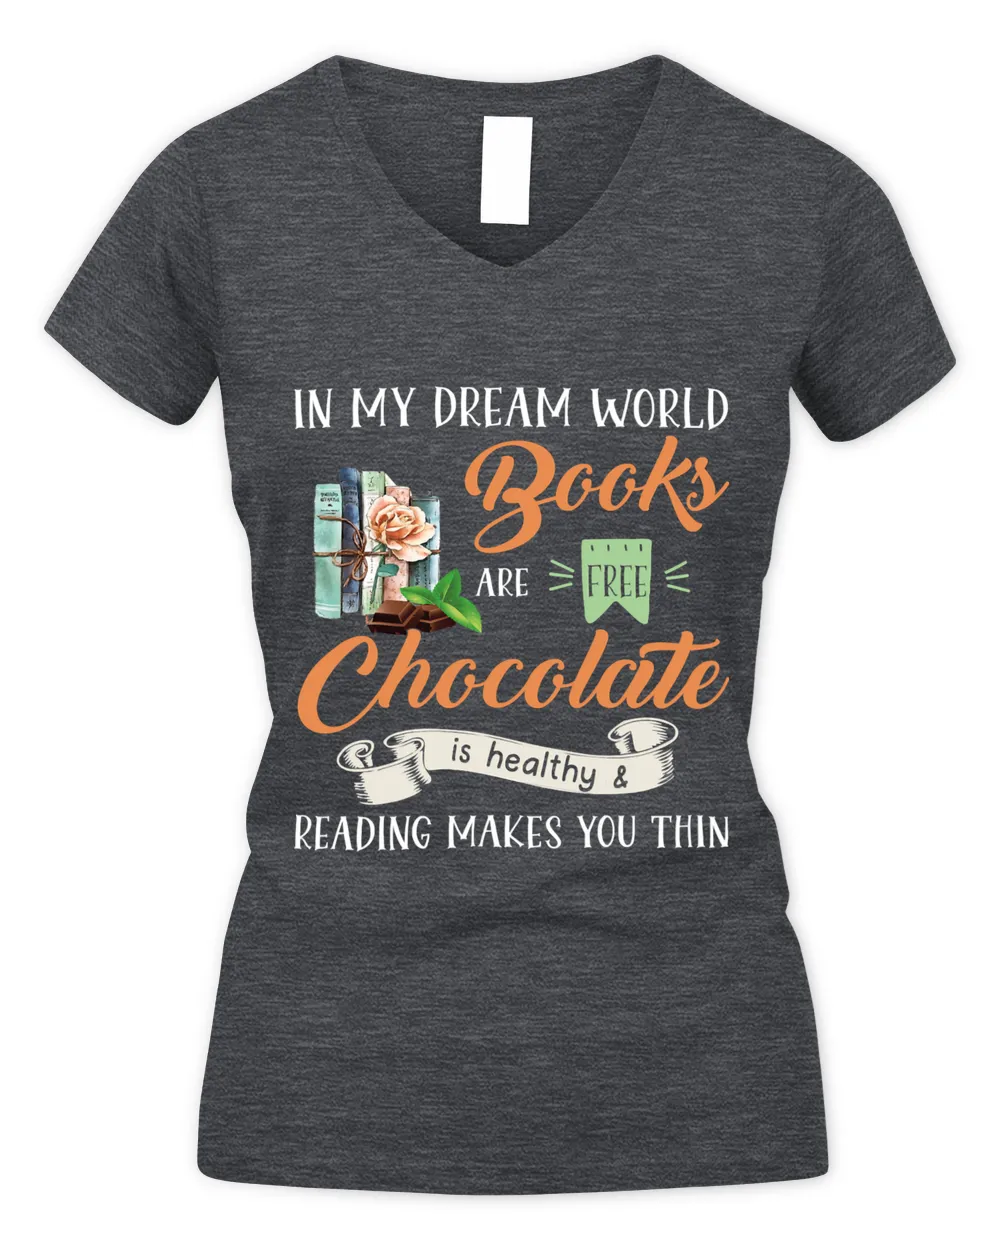 In my dream world books are free chocolate is healthy 116